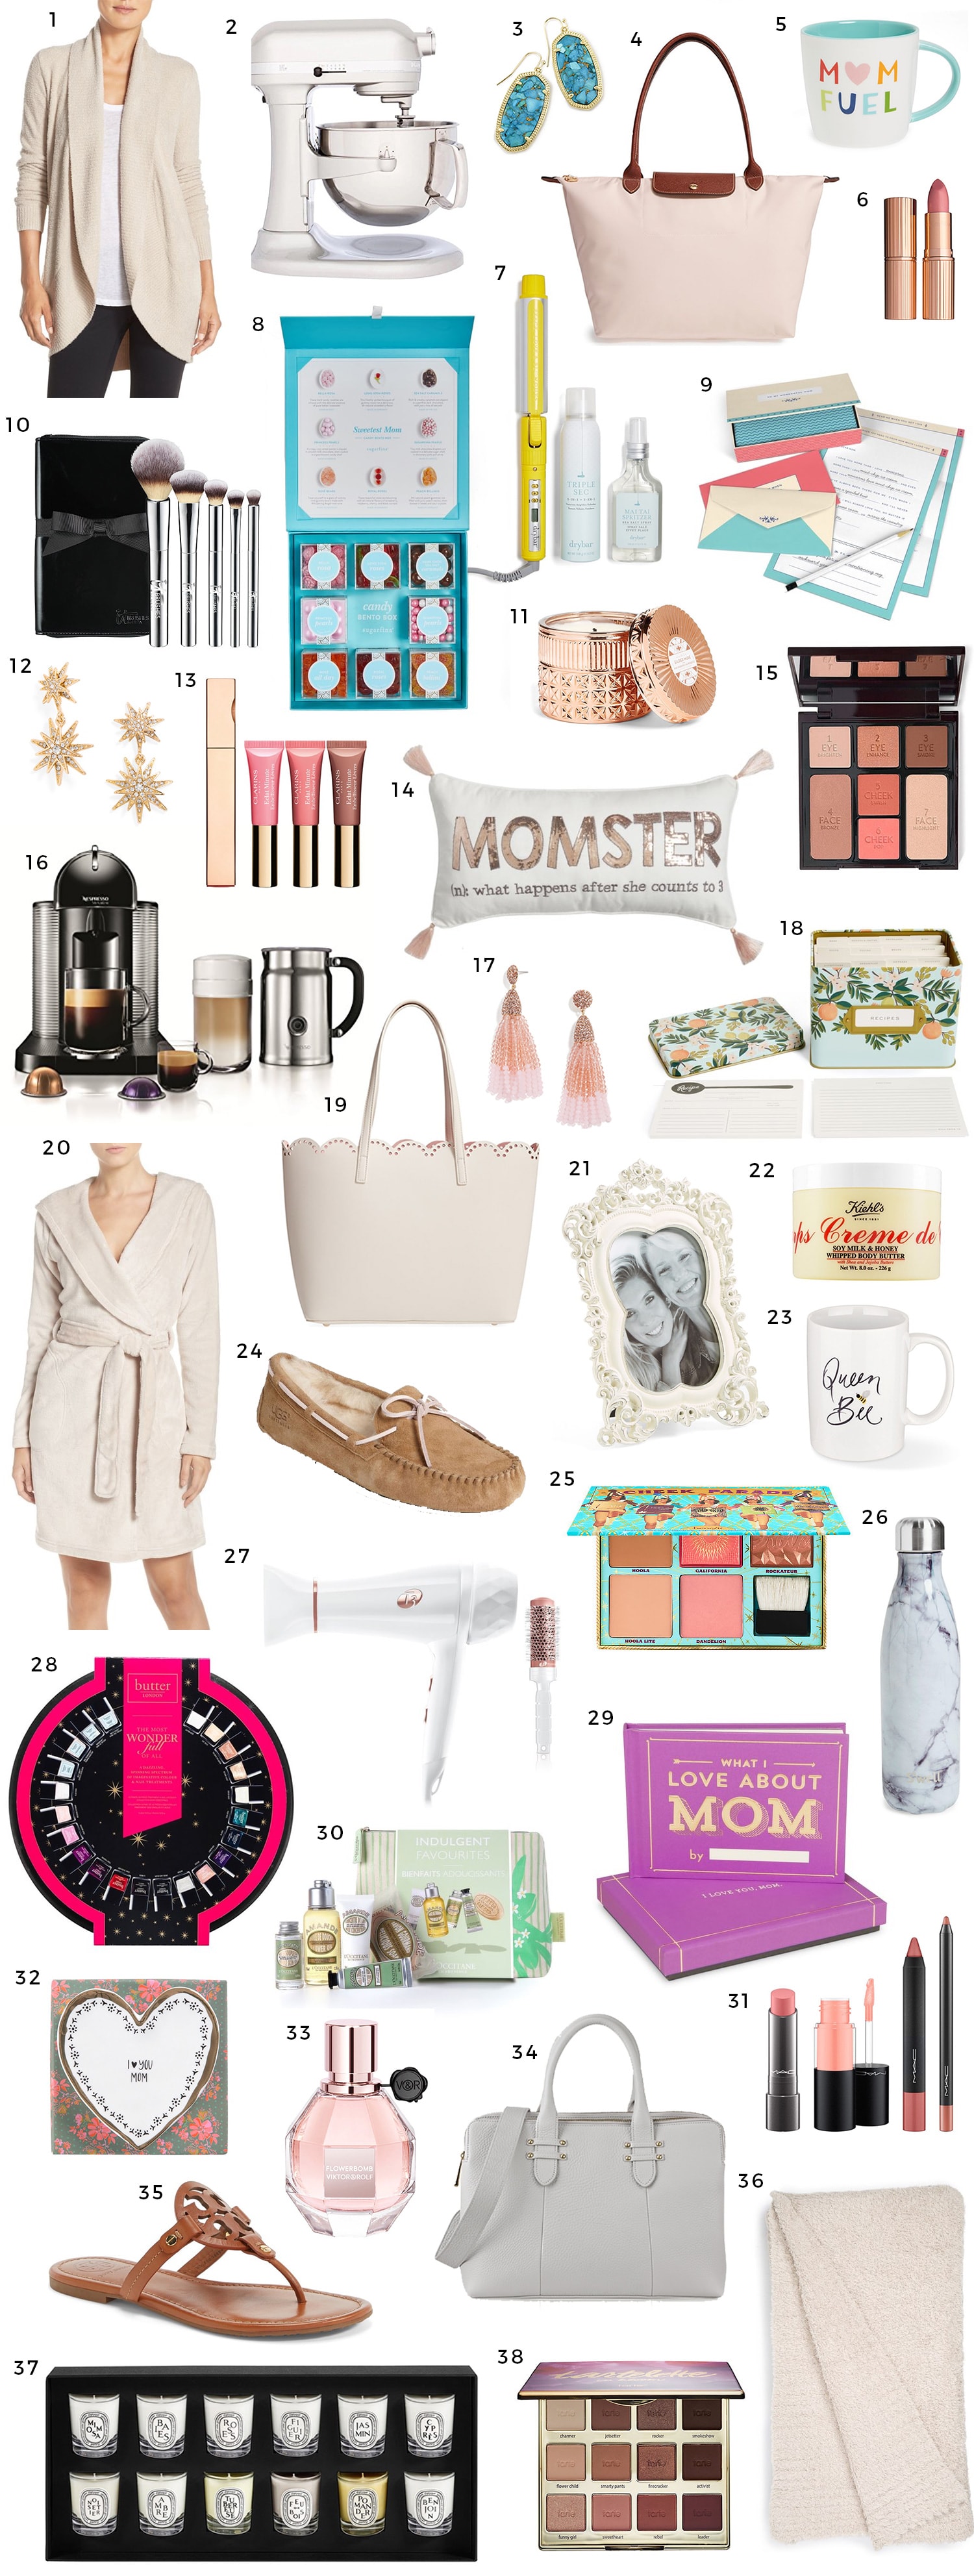 Mother's Day gift | gifts that she'll love under $100, under $50, and under $25 | gift ideas for women, best gifts for women